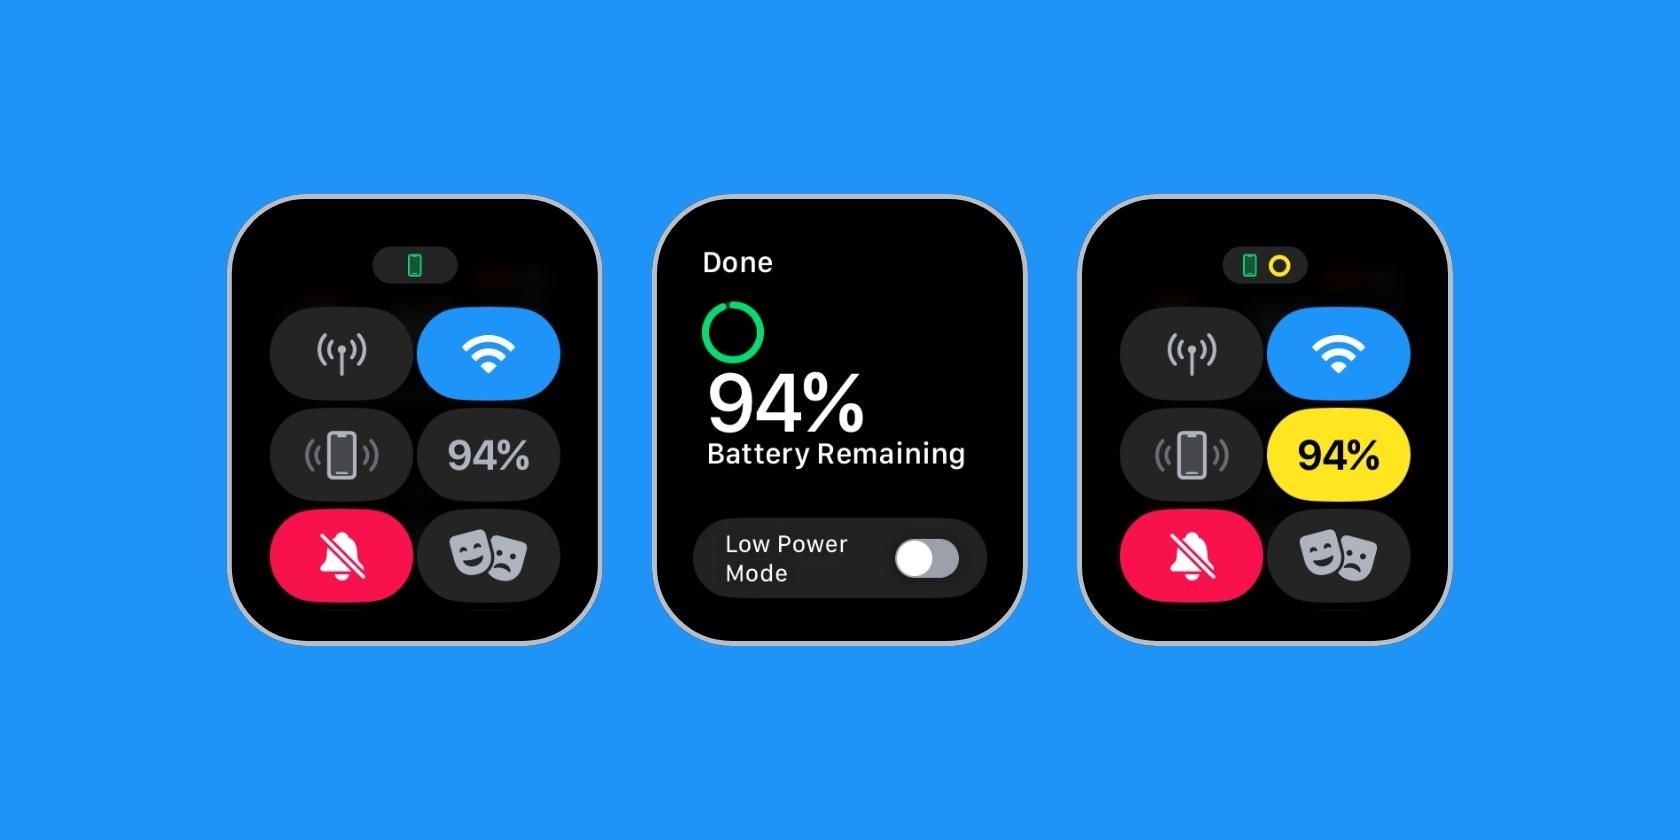 Image showing screens to enable Low Power Mode on Apple Watch